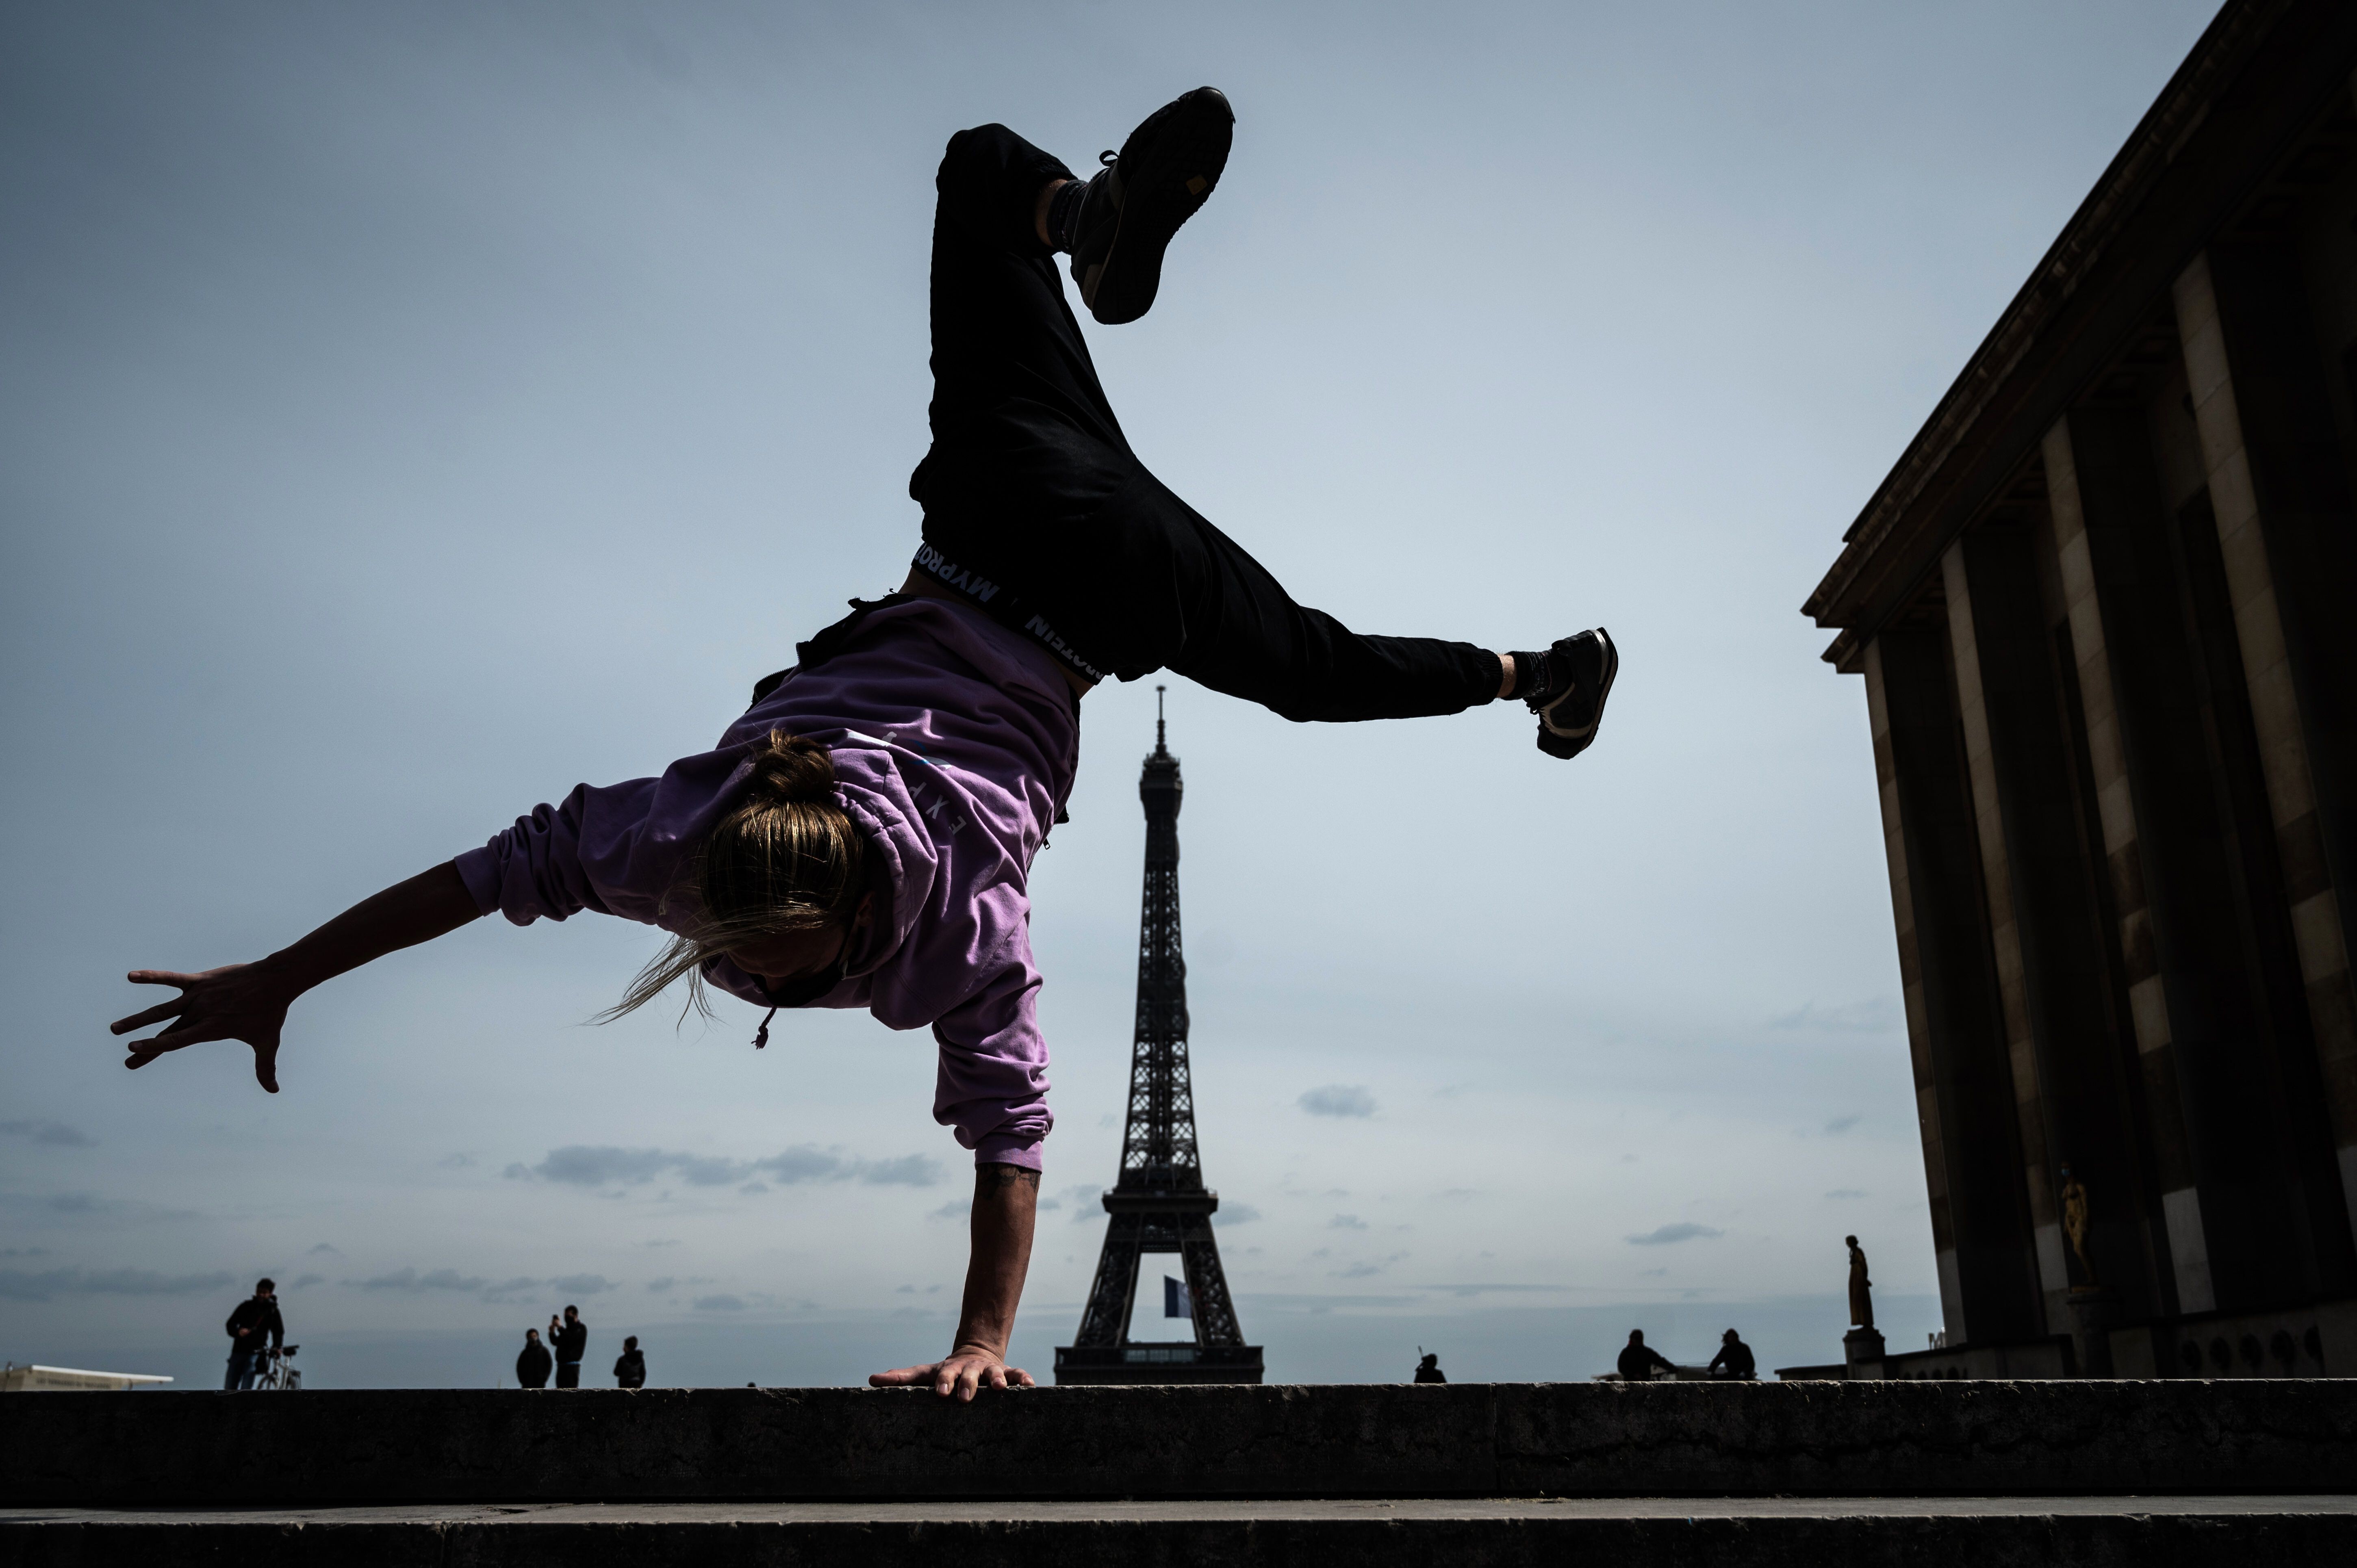 French freerunner Johan Tonnoir practises on Trocadero Plaza with the Eiffel Tower in the background in Paris on May 11, the first day of France’s easing of lockdown measures that had been in place for 55 days to curb the spread of Covid-19. Photo: AFP